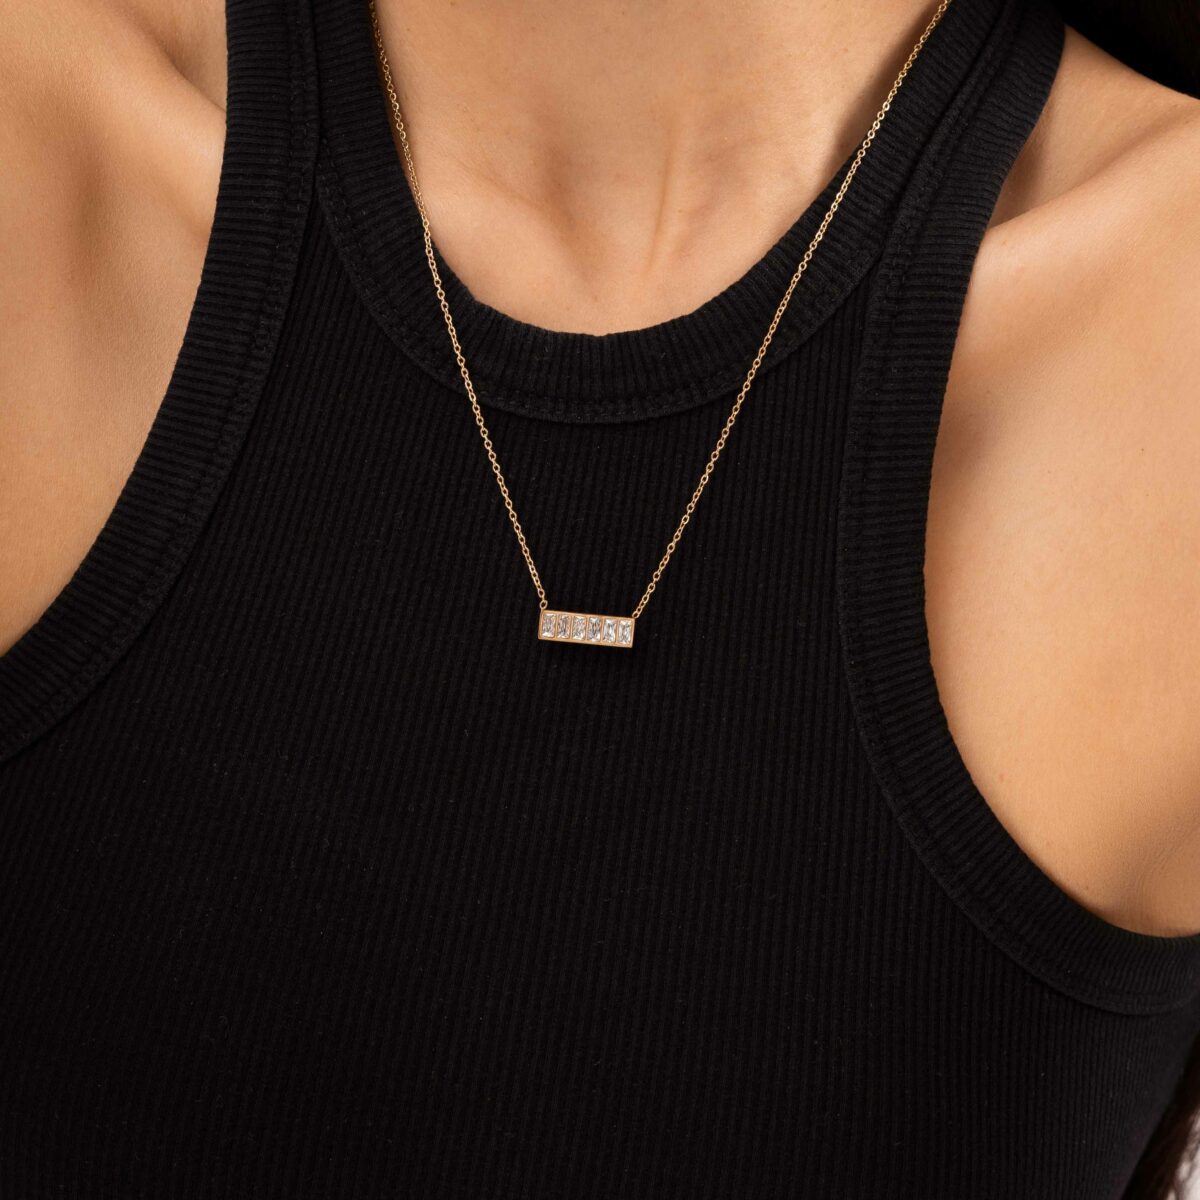 https://m.clubbella.co/product/solitaire-bar-necklace/ GALA BAR NECKLACE (6)